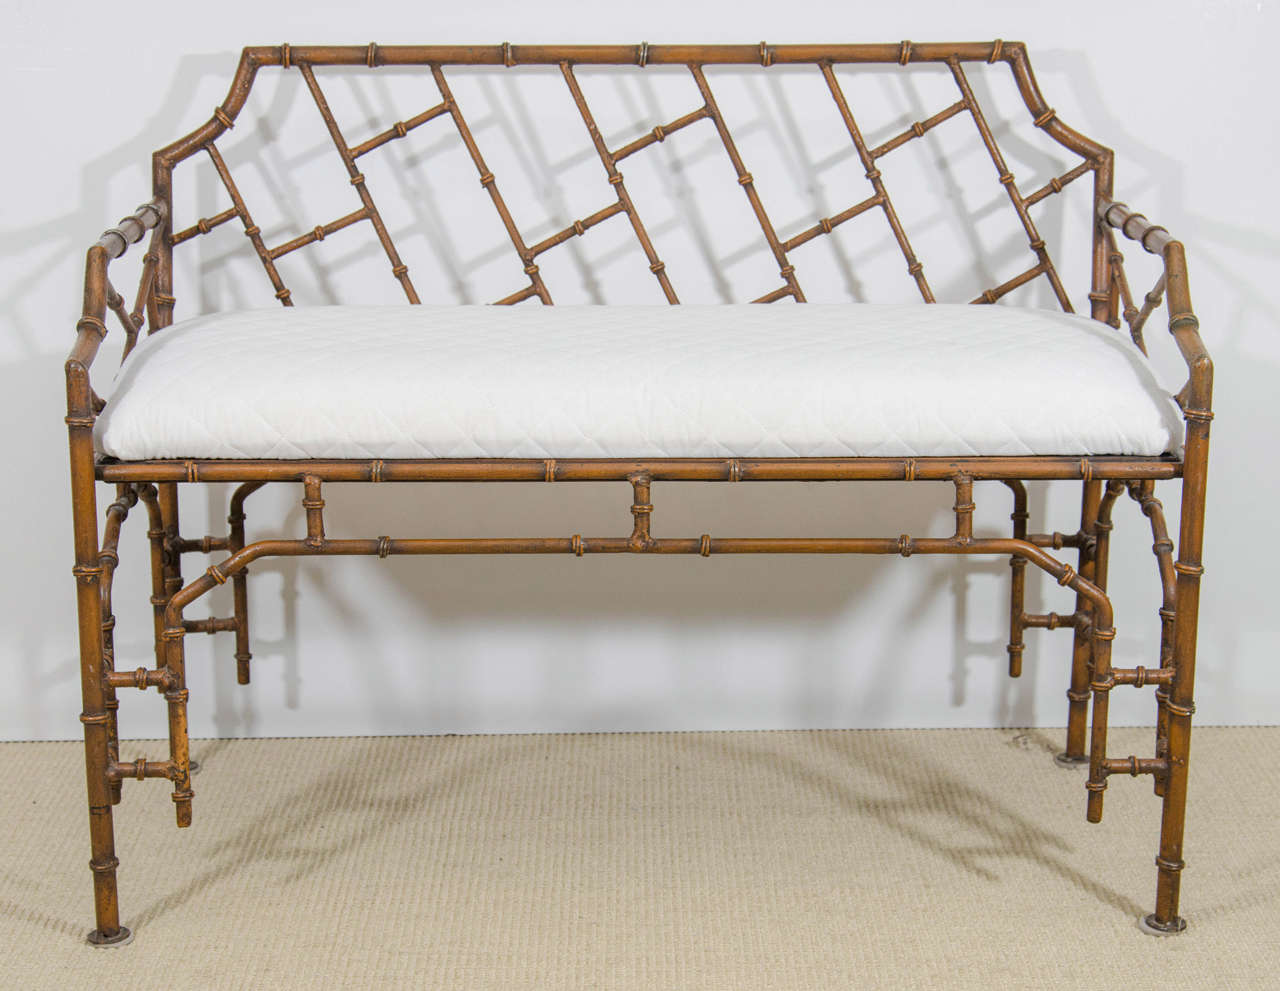 A vintage copper colored iron Faux bamboo bench with white upholstered cushion.

Good vintage condition with age appropriate wear.

Reduced from: $3,450